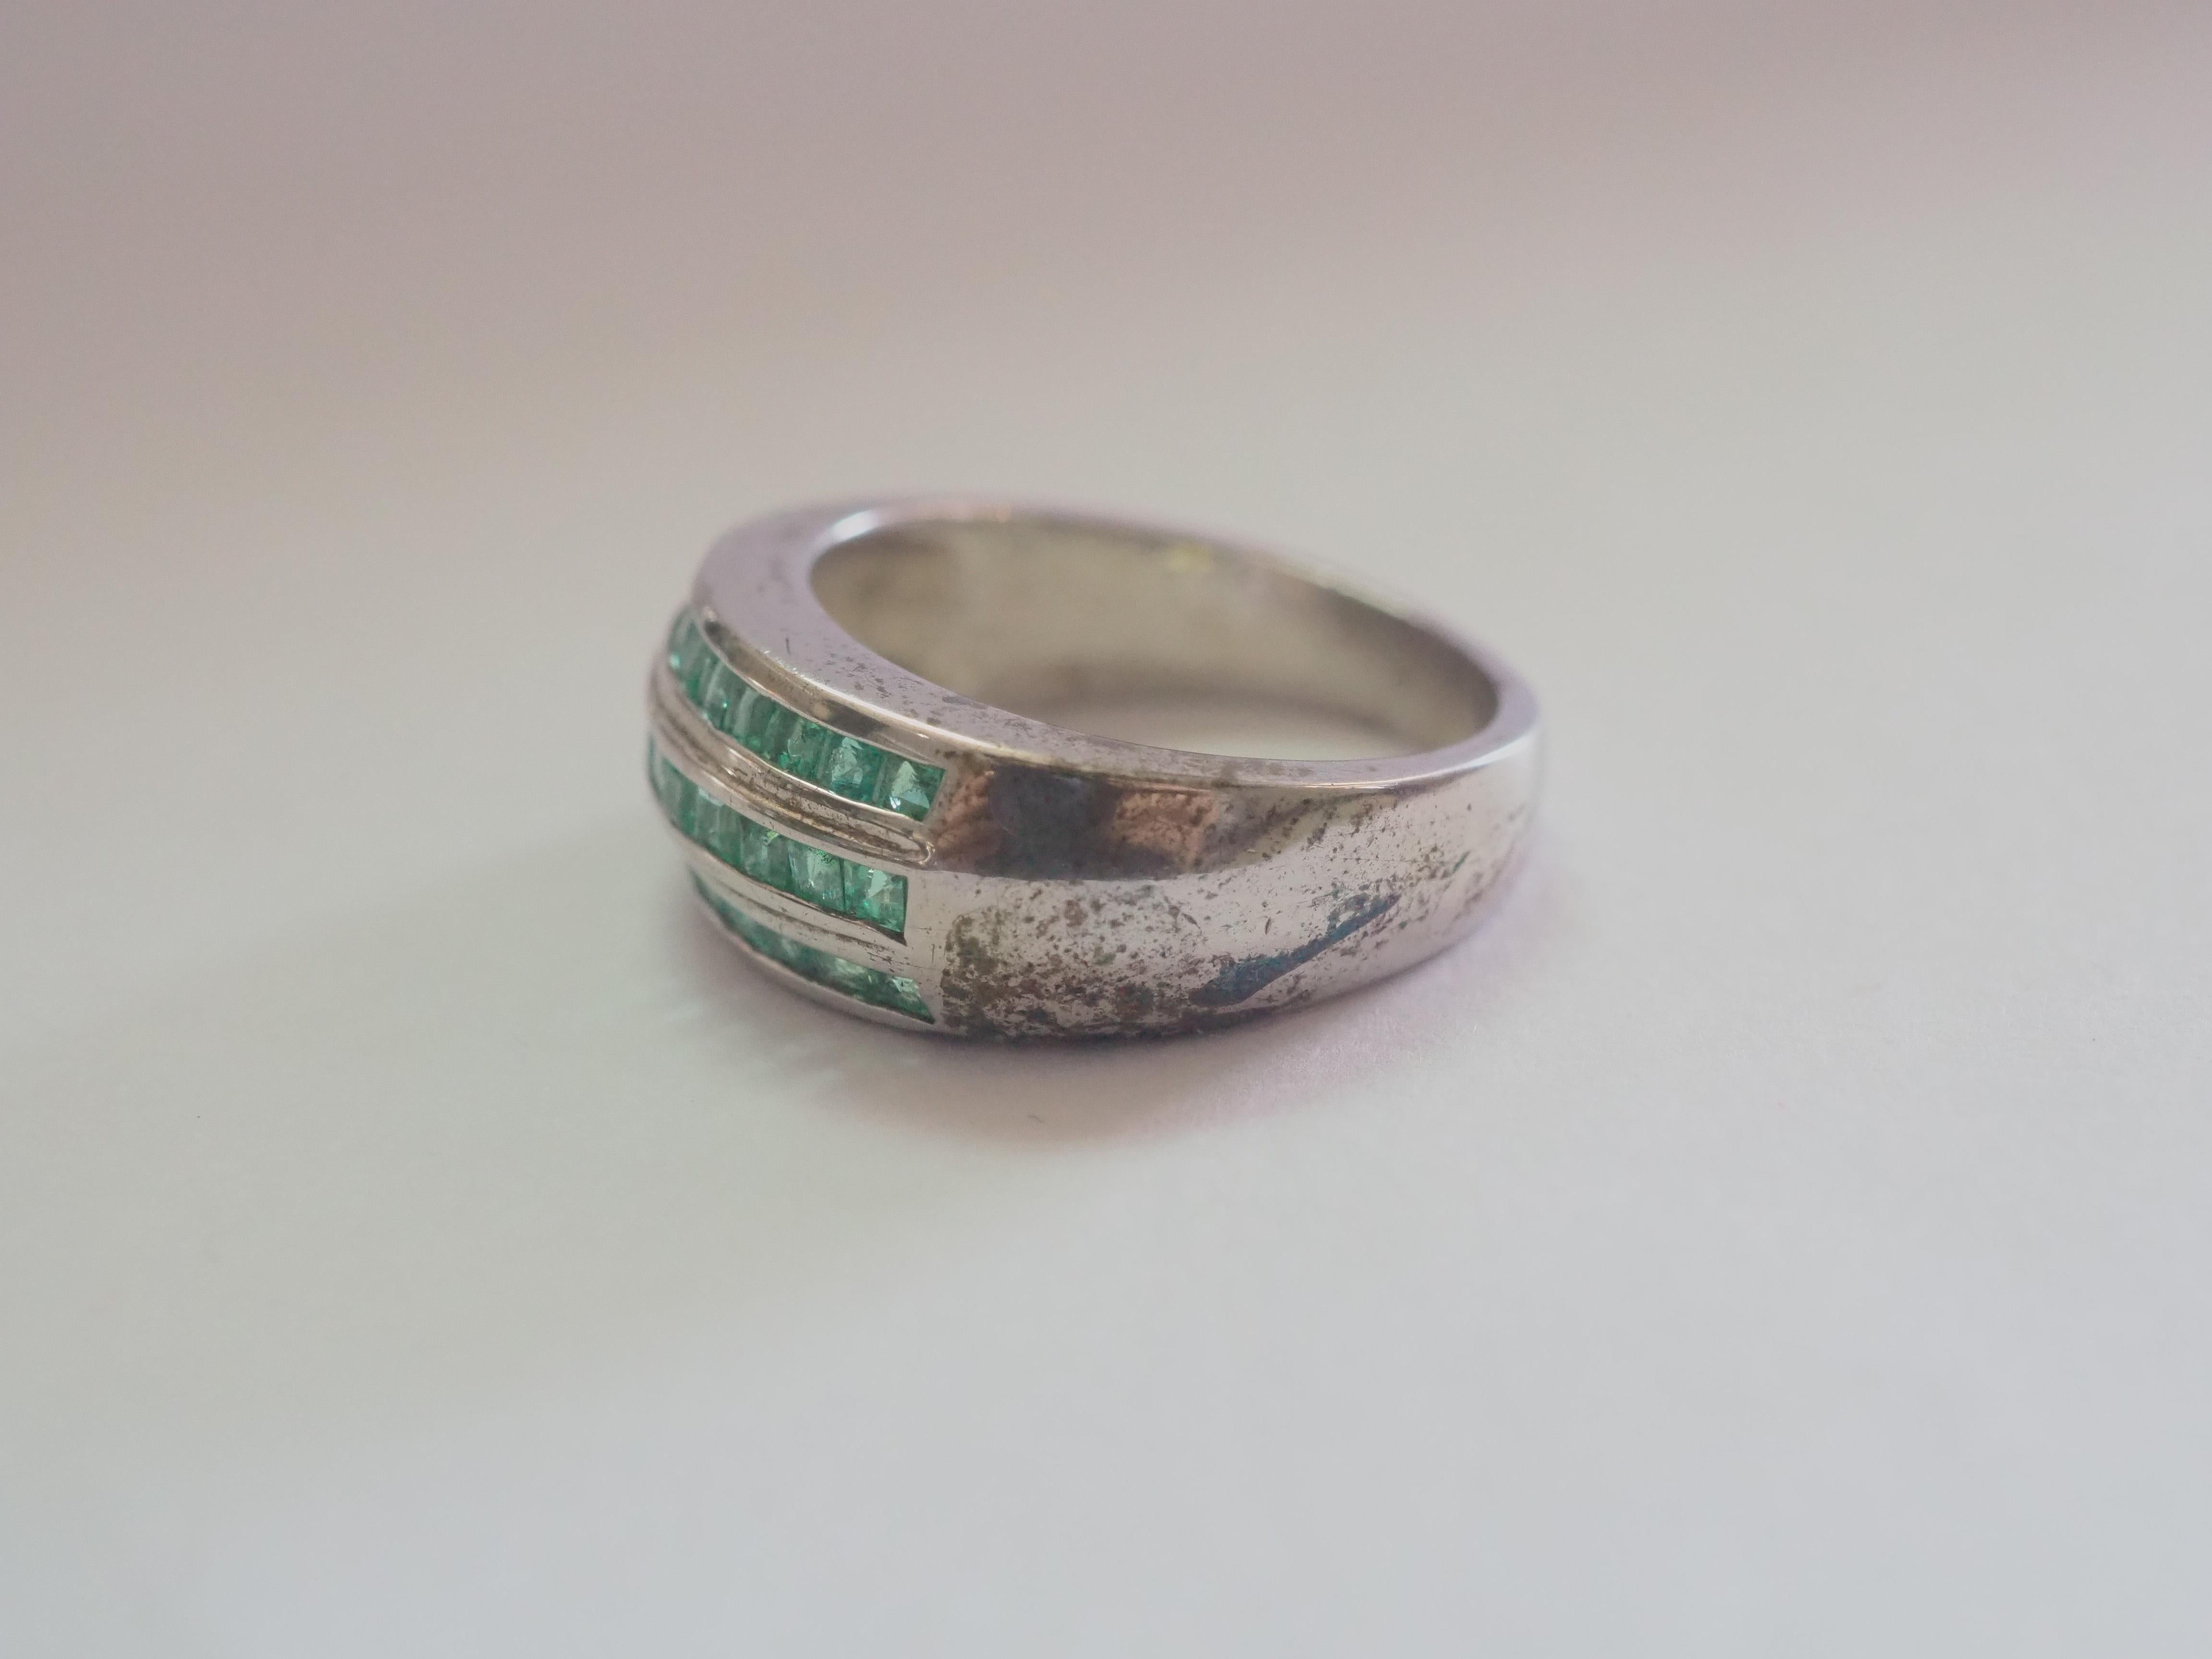 This ring is a stunning unisex band ring in solid sterling silver. The ring is decorated by natural and decent squared emeralds inlaid beautifully into 3 rows. The emerald gemstone is one of the most popular in the gem world with rich history and